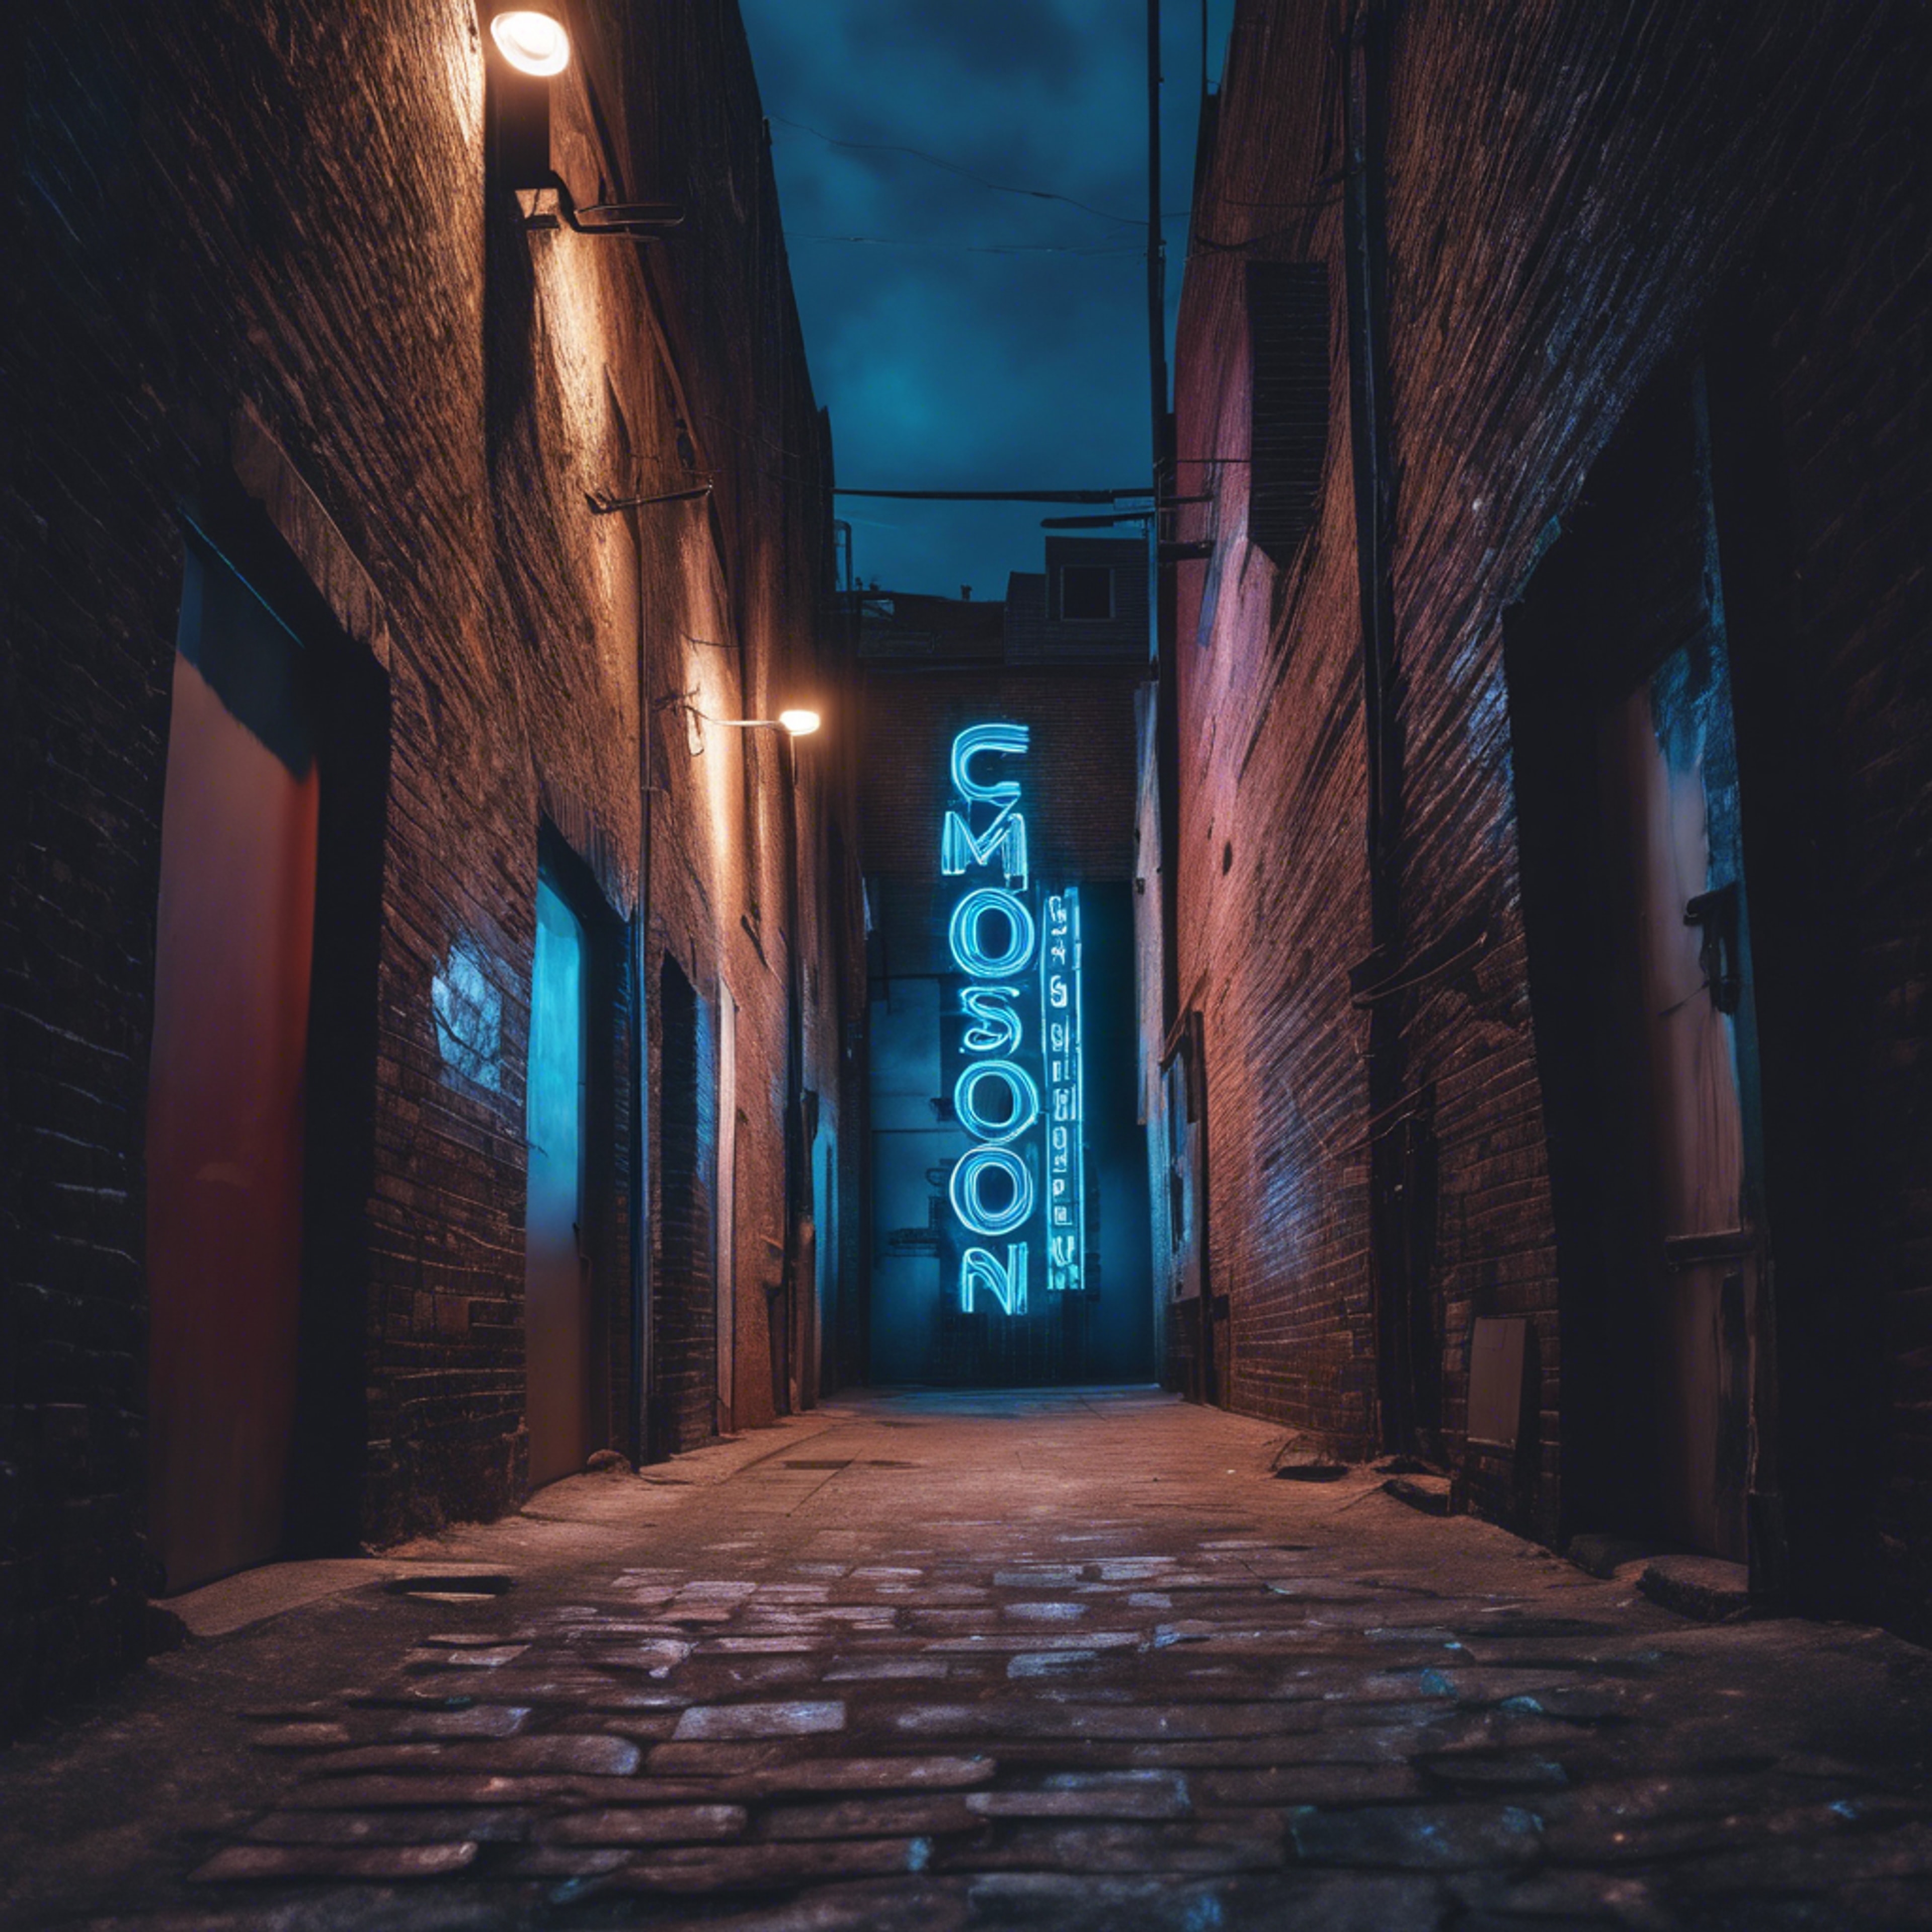 A cool blue neon sign glowing in a dark alley Валлпапер[2a7b25783bff4a339087]